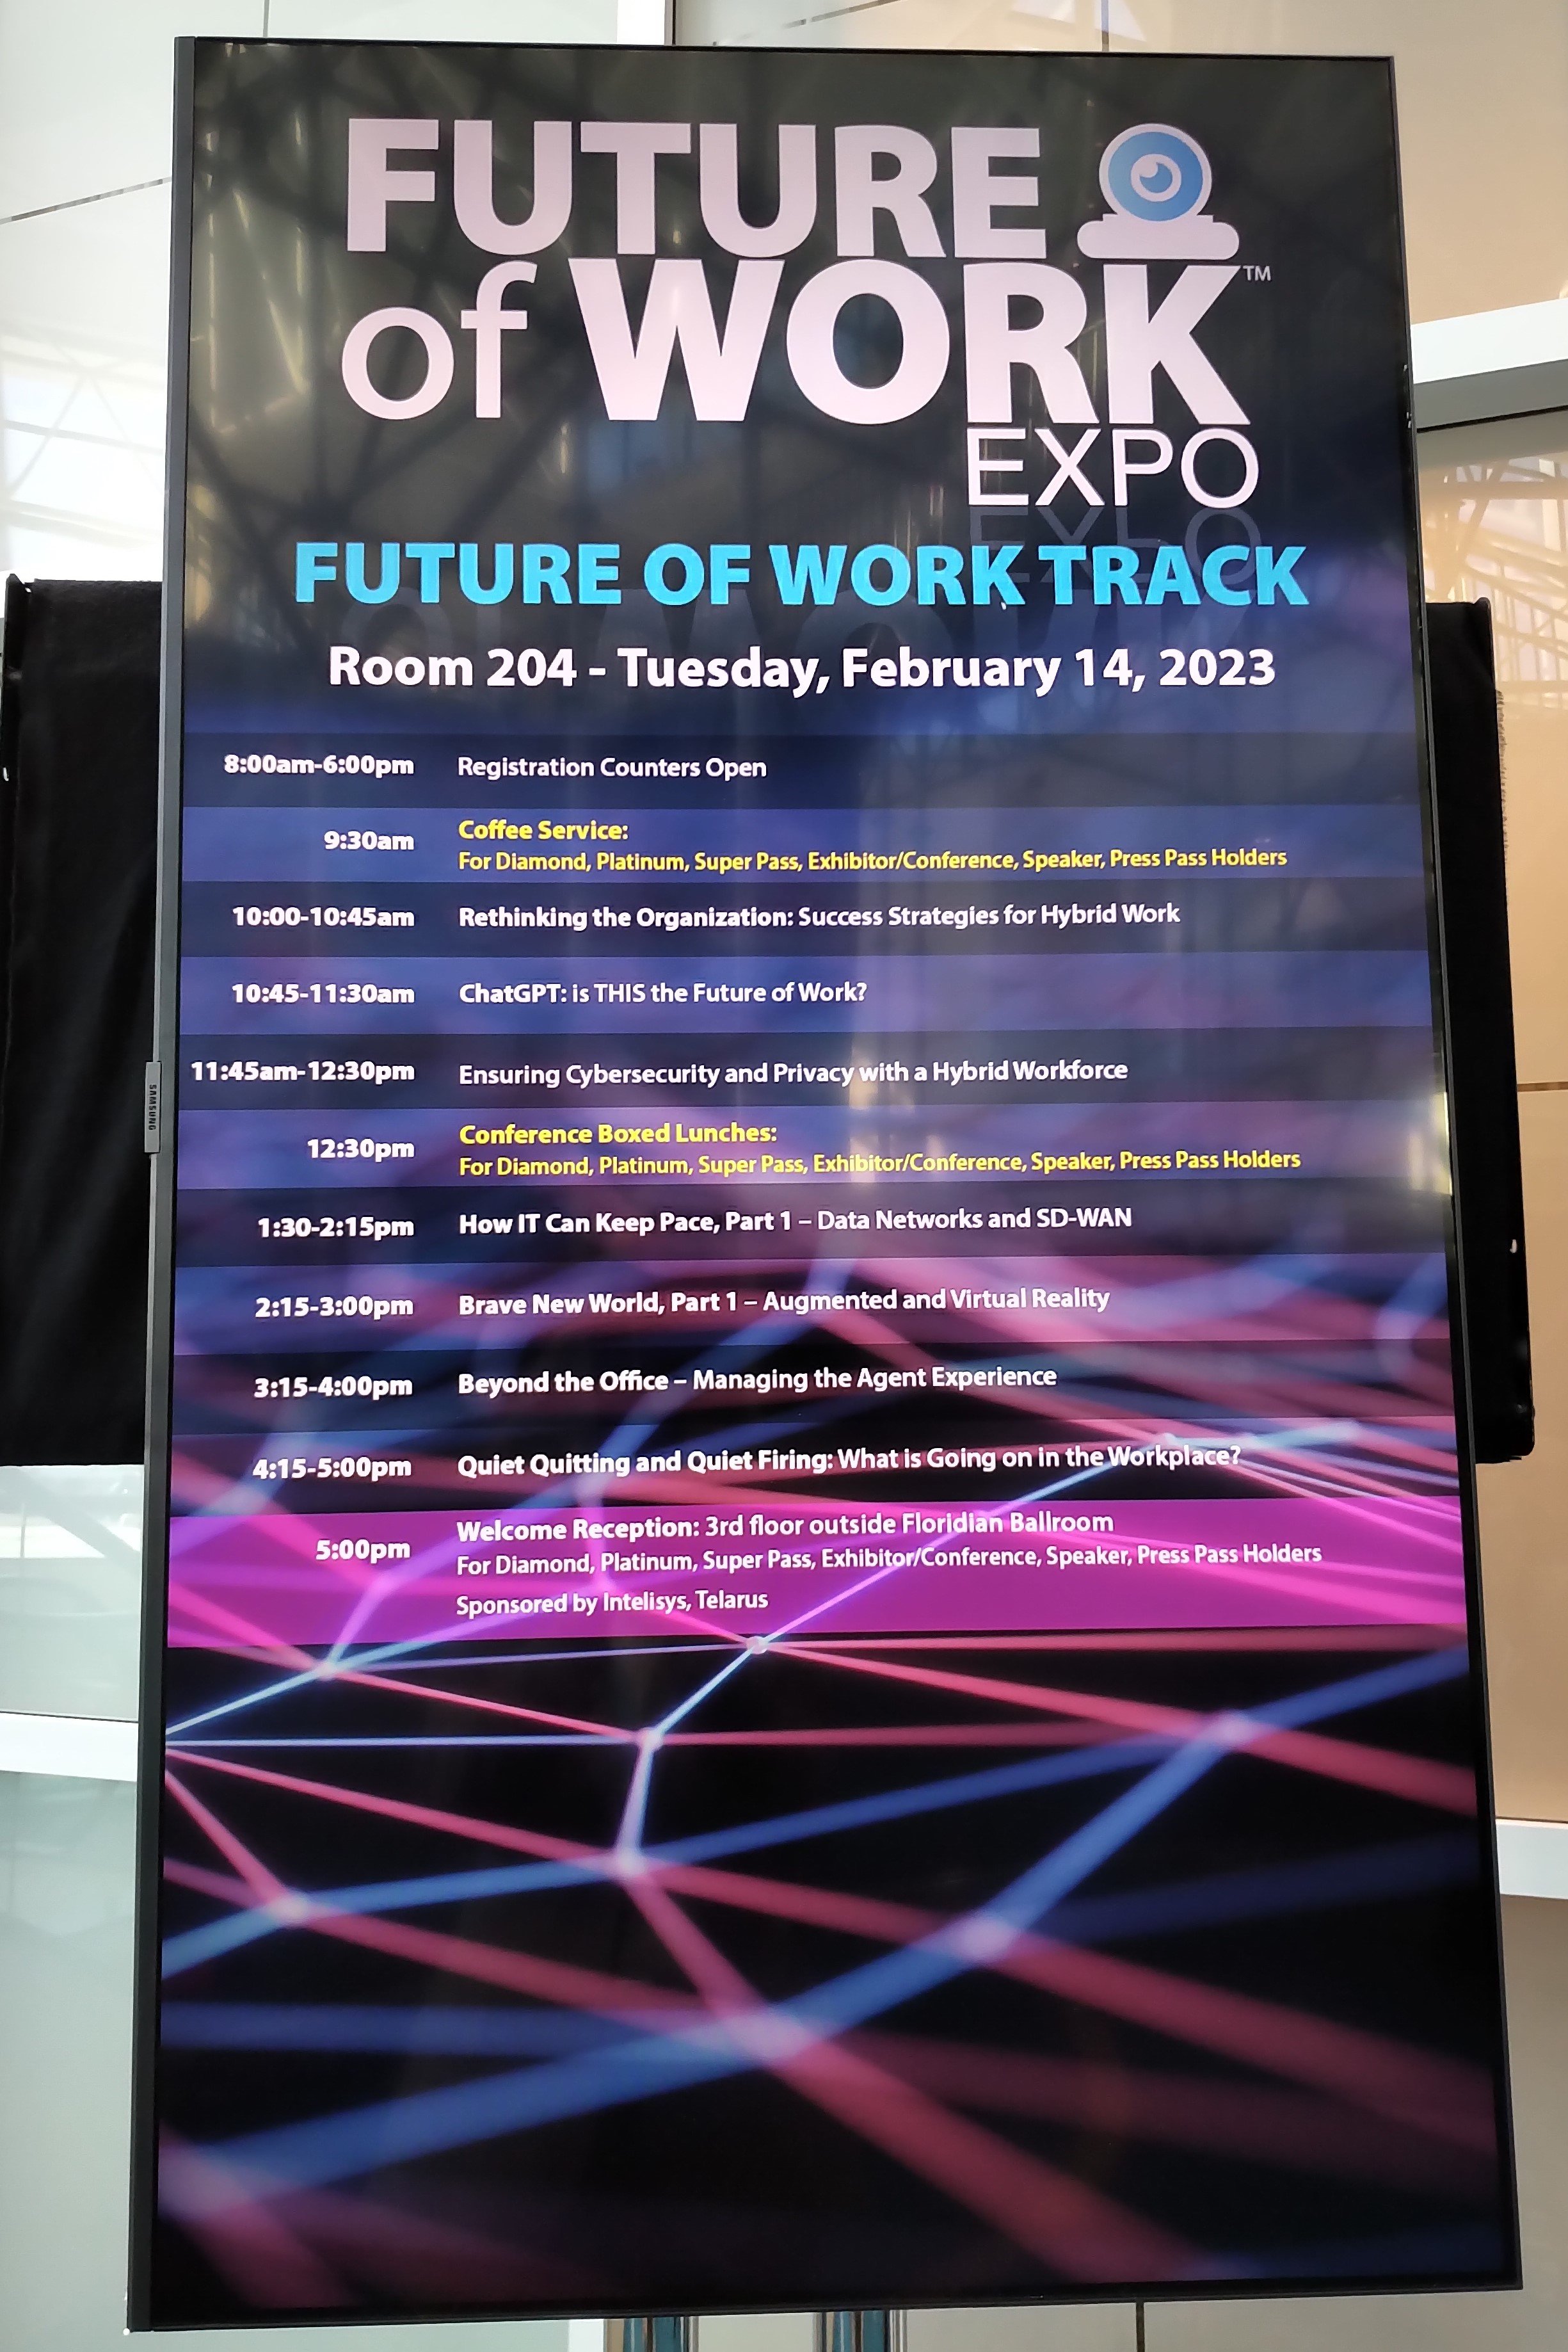 Agenda for Day 1 of my Future of Work Expo